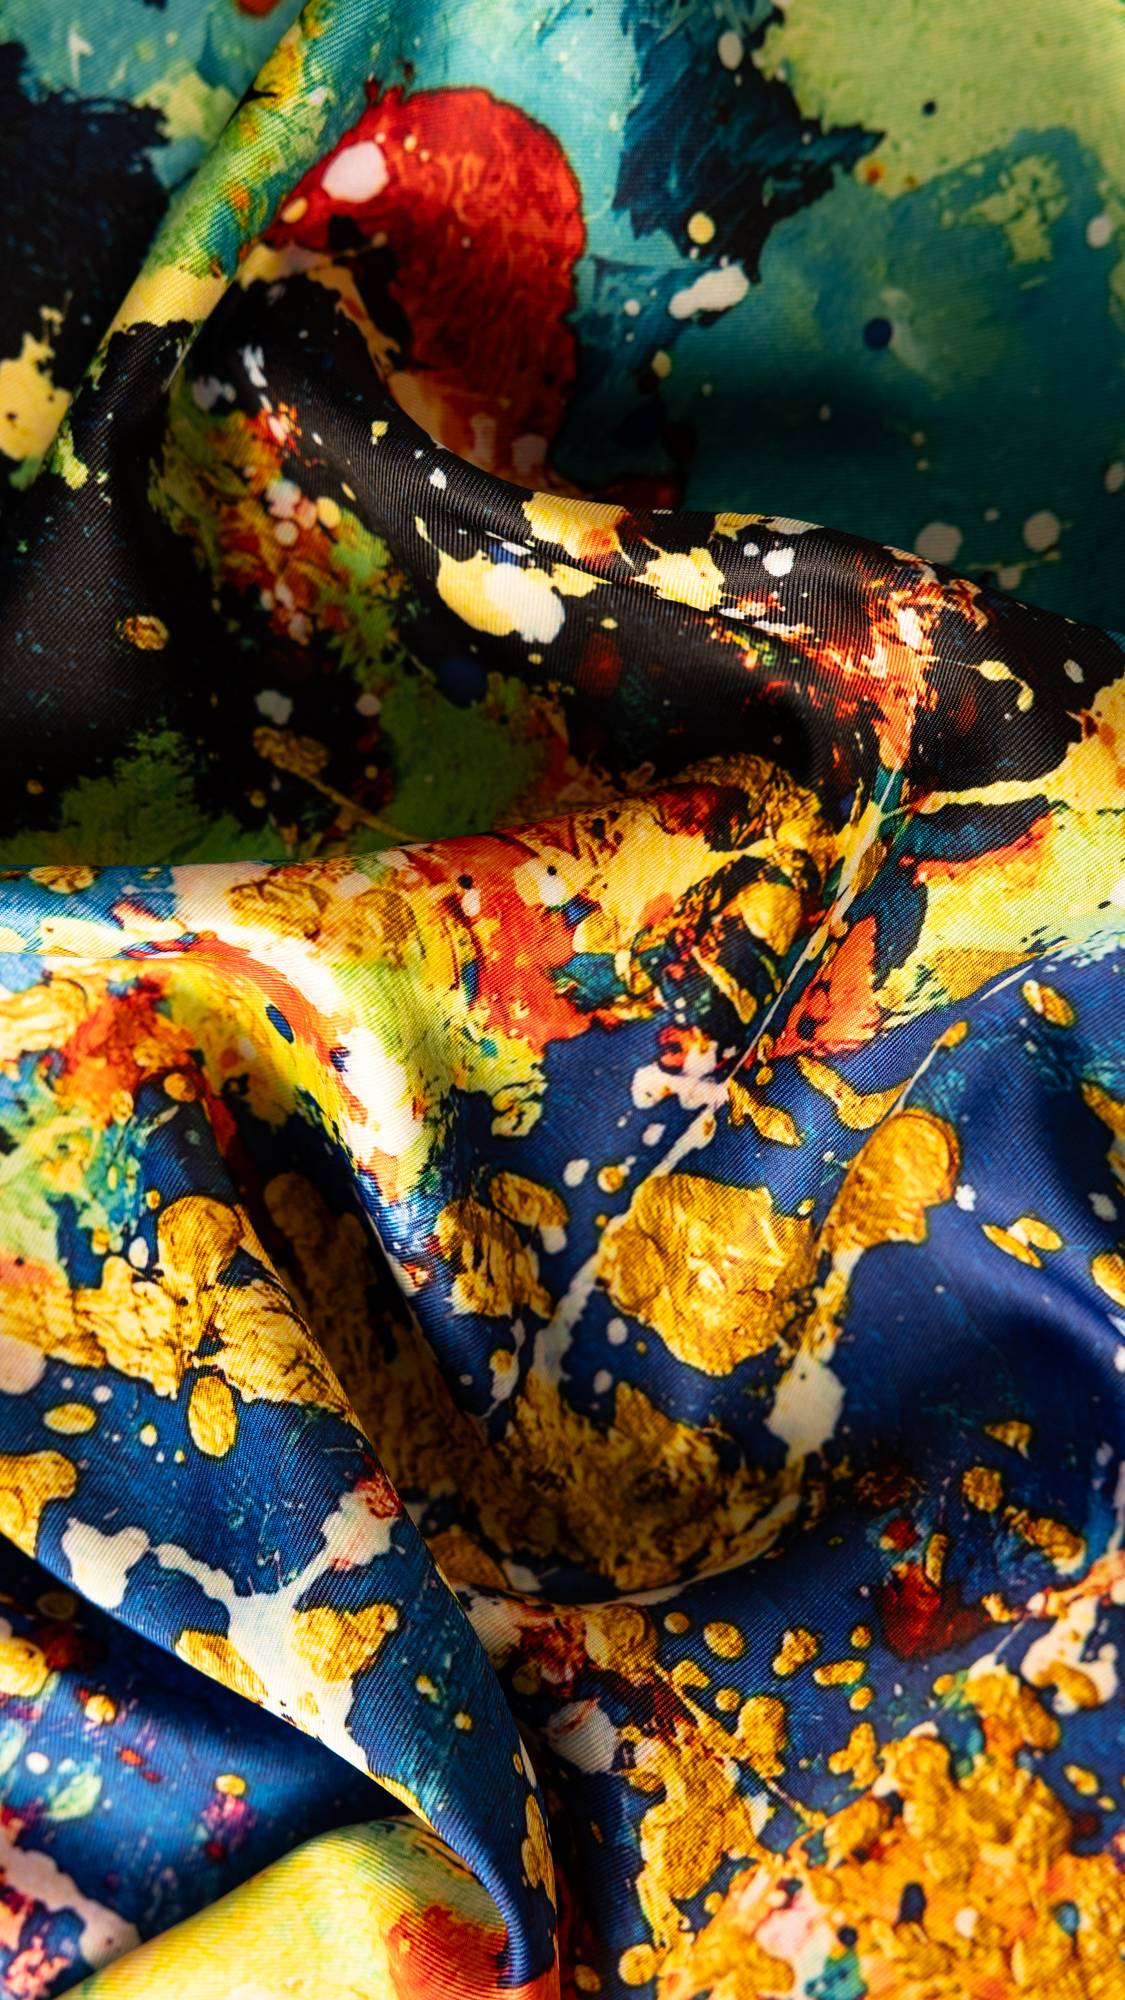 Image shows a super-close up of the Outer Space knot wrap focusing on the explosive, vibrant, contrasting colours.